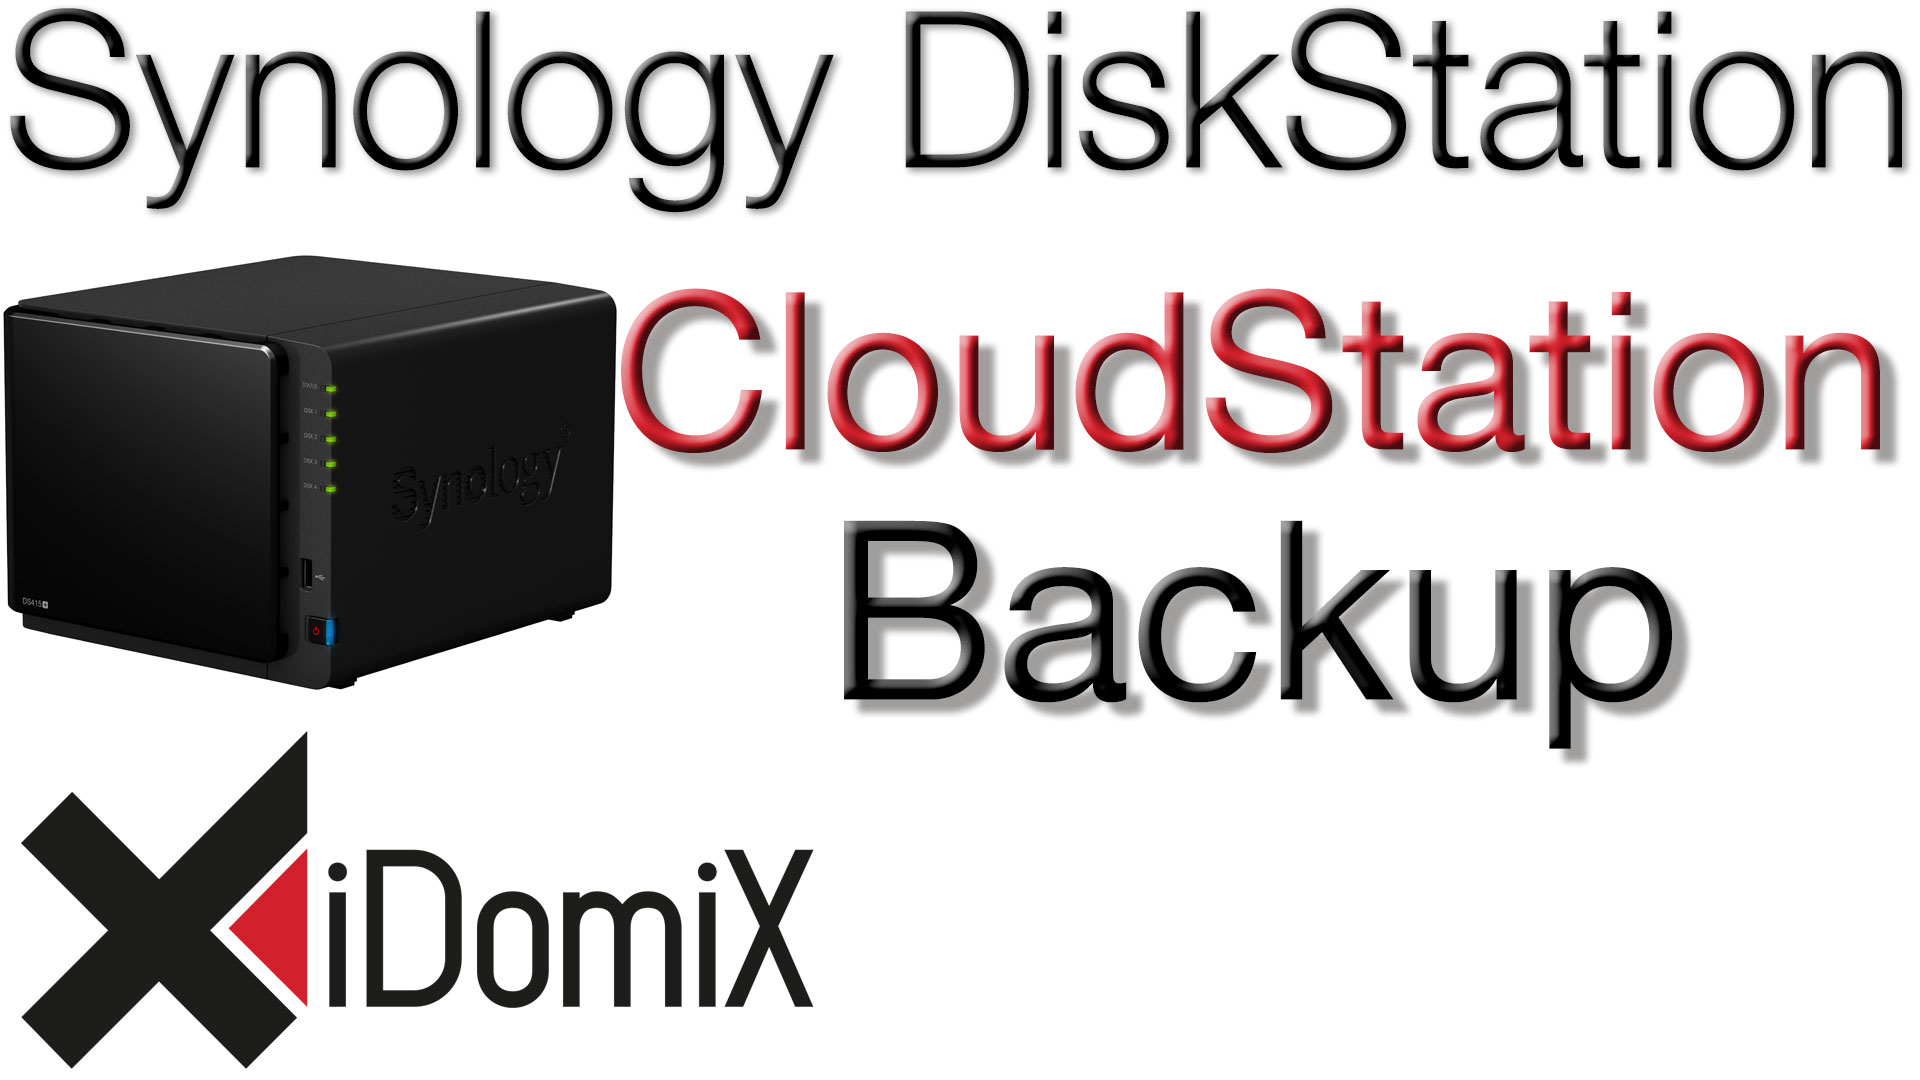 synology cloud station backup versions